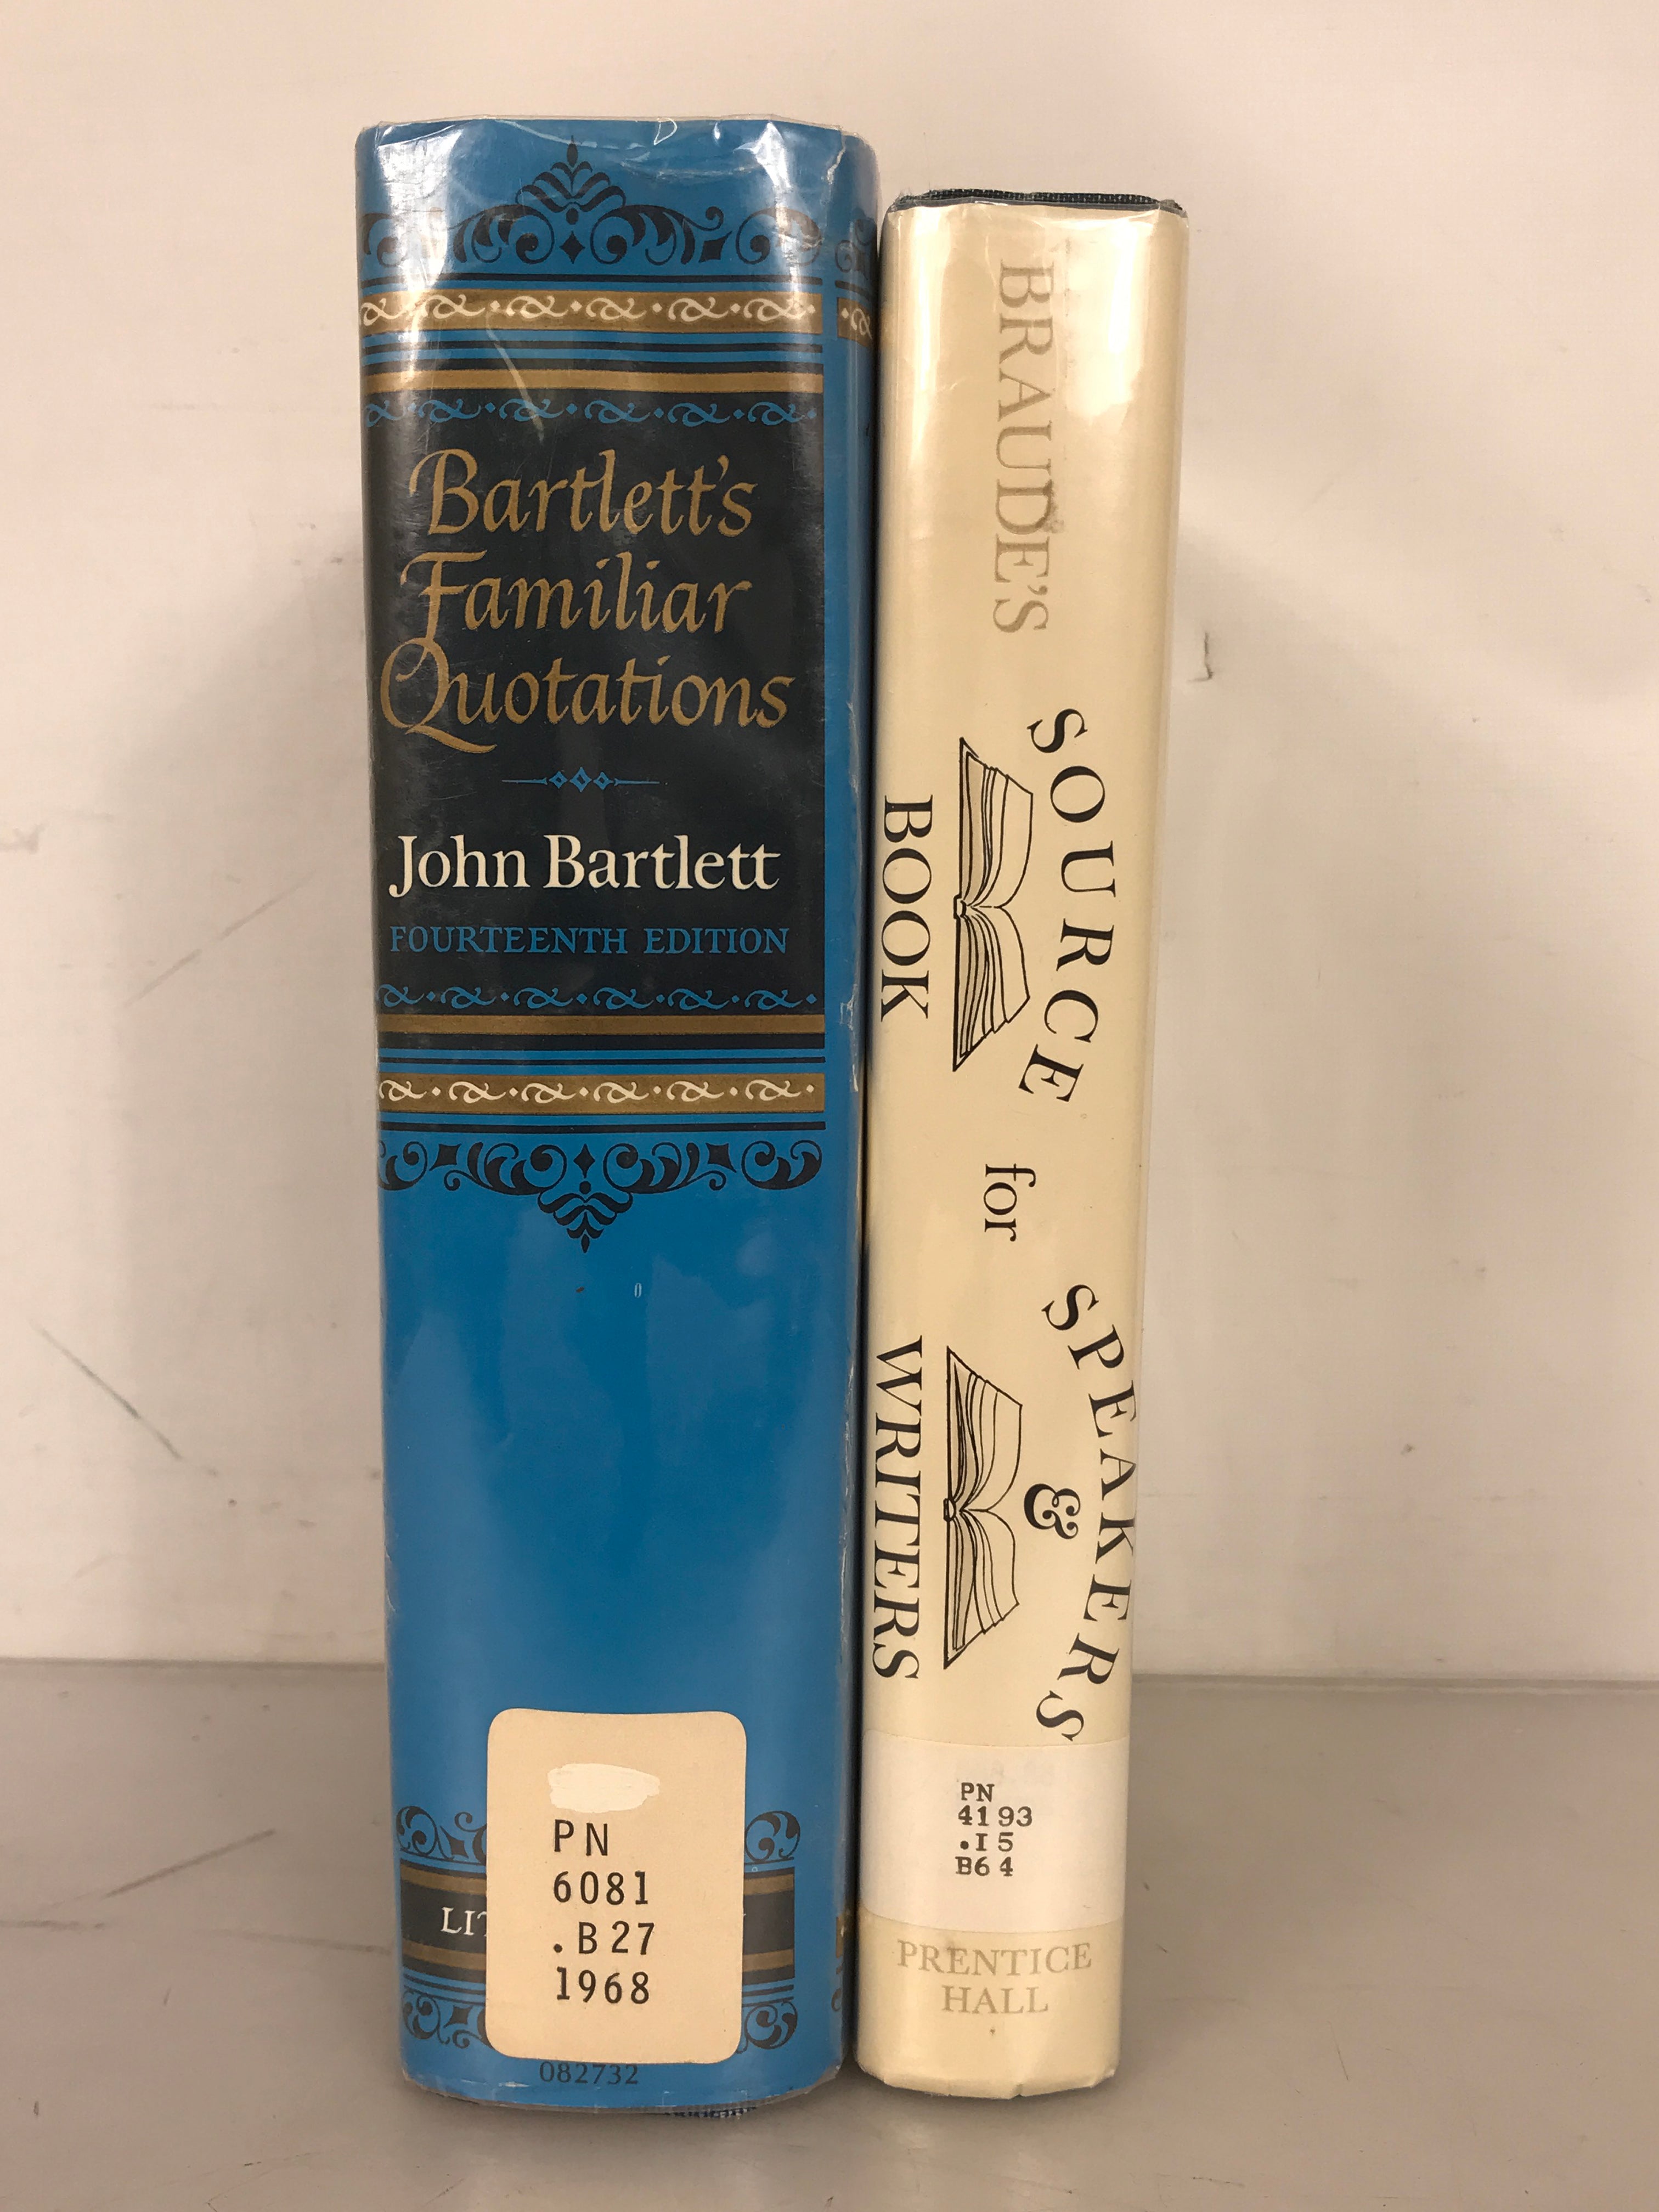 Lot of 2 Source and Quotation Books 1968 HC DJ